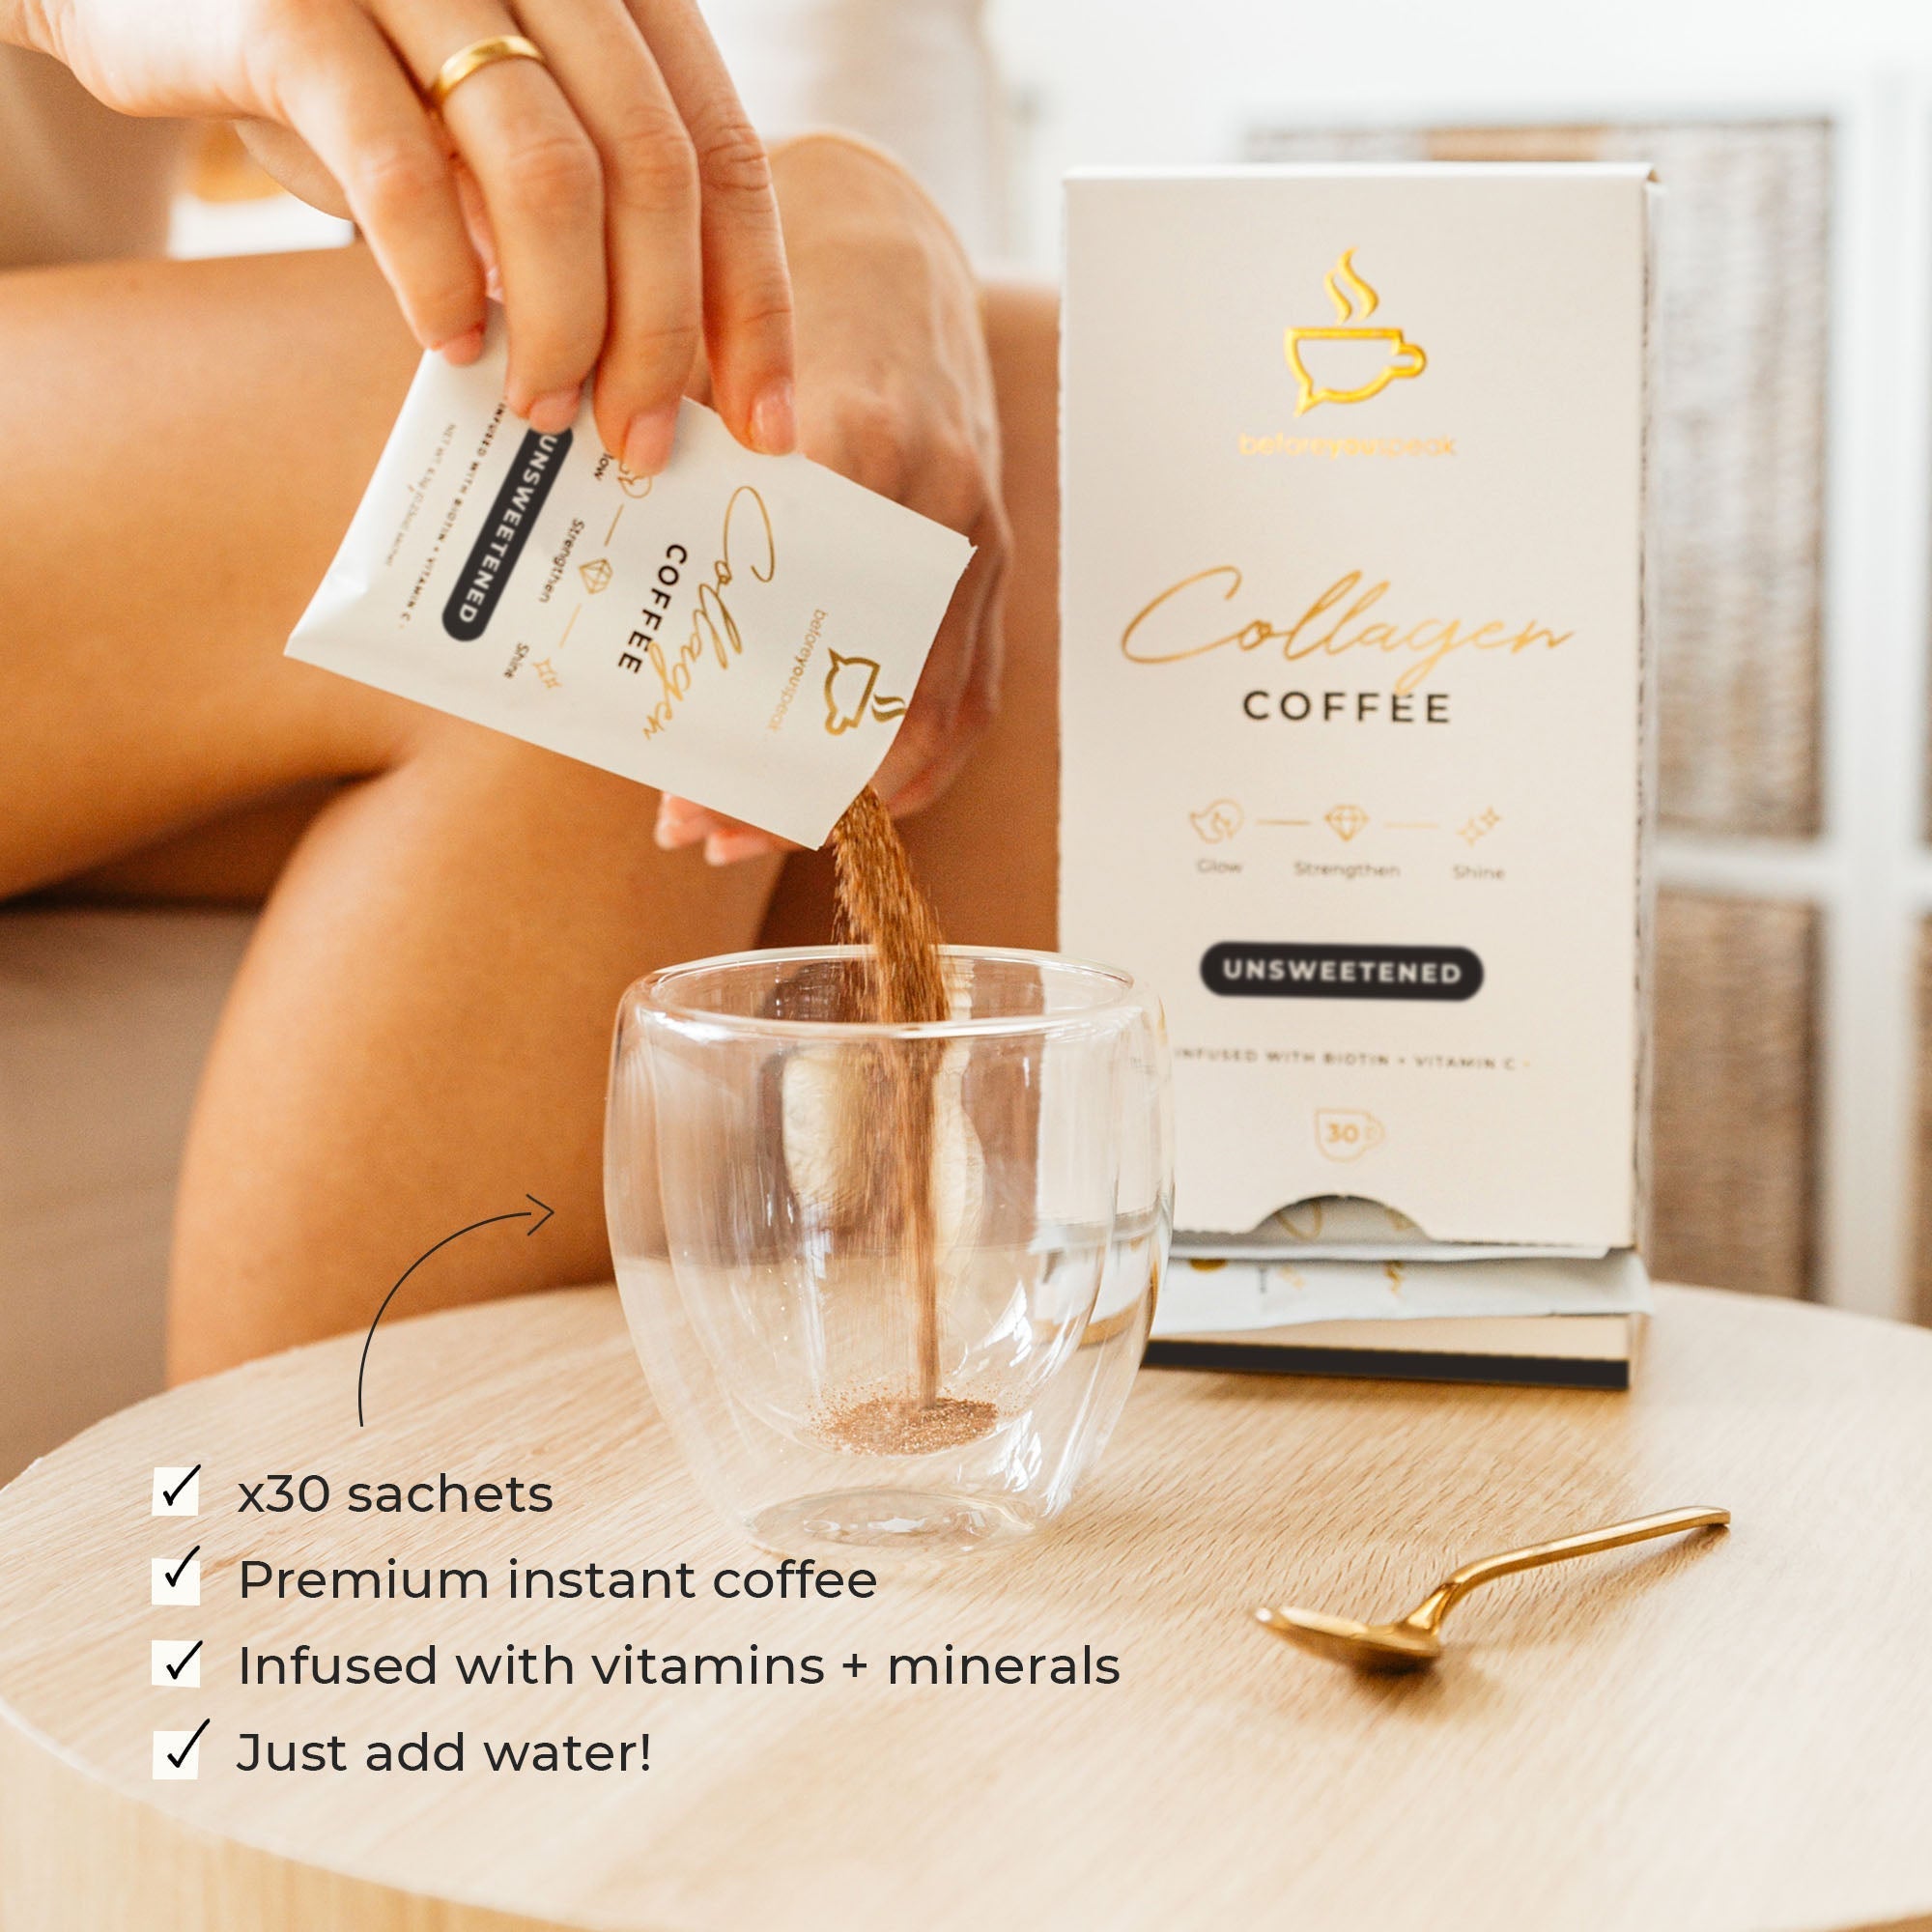 Collagen Coffee Unsweetened - Exquisite Laser Clinic